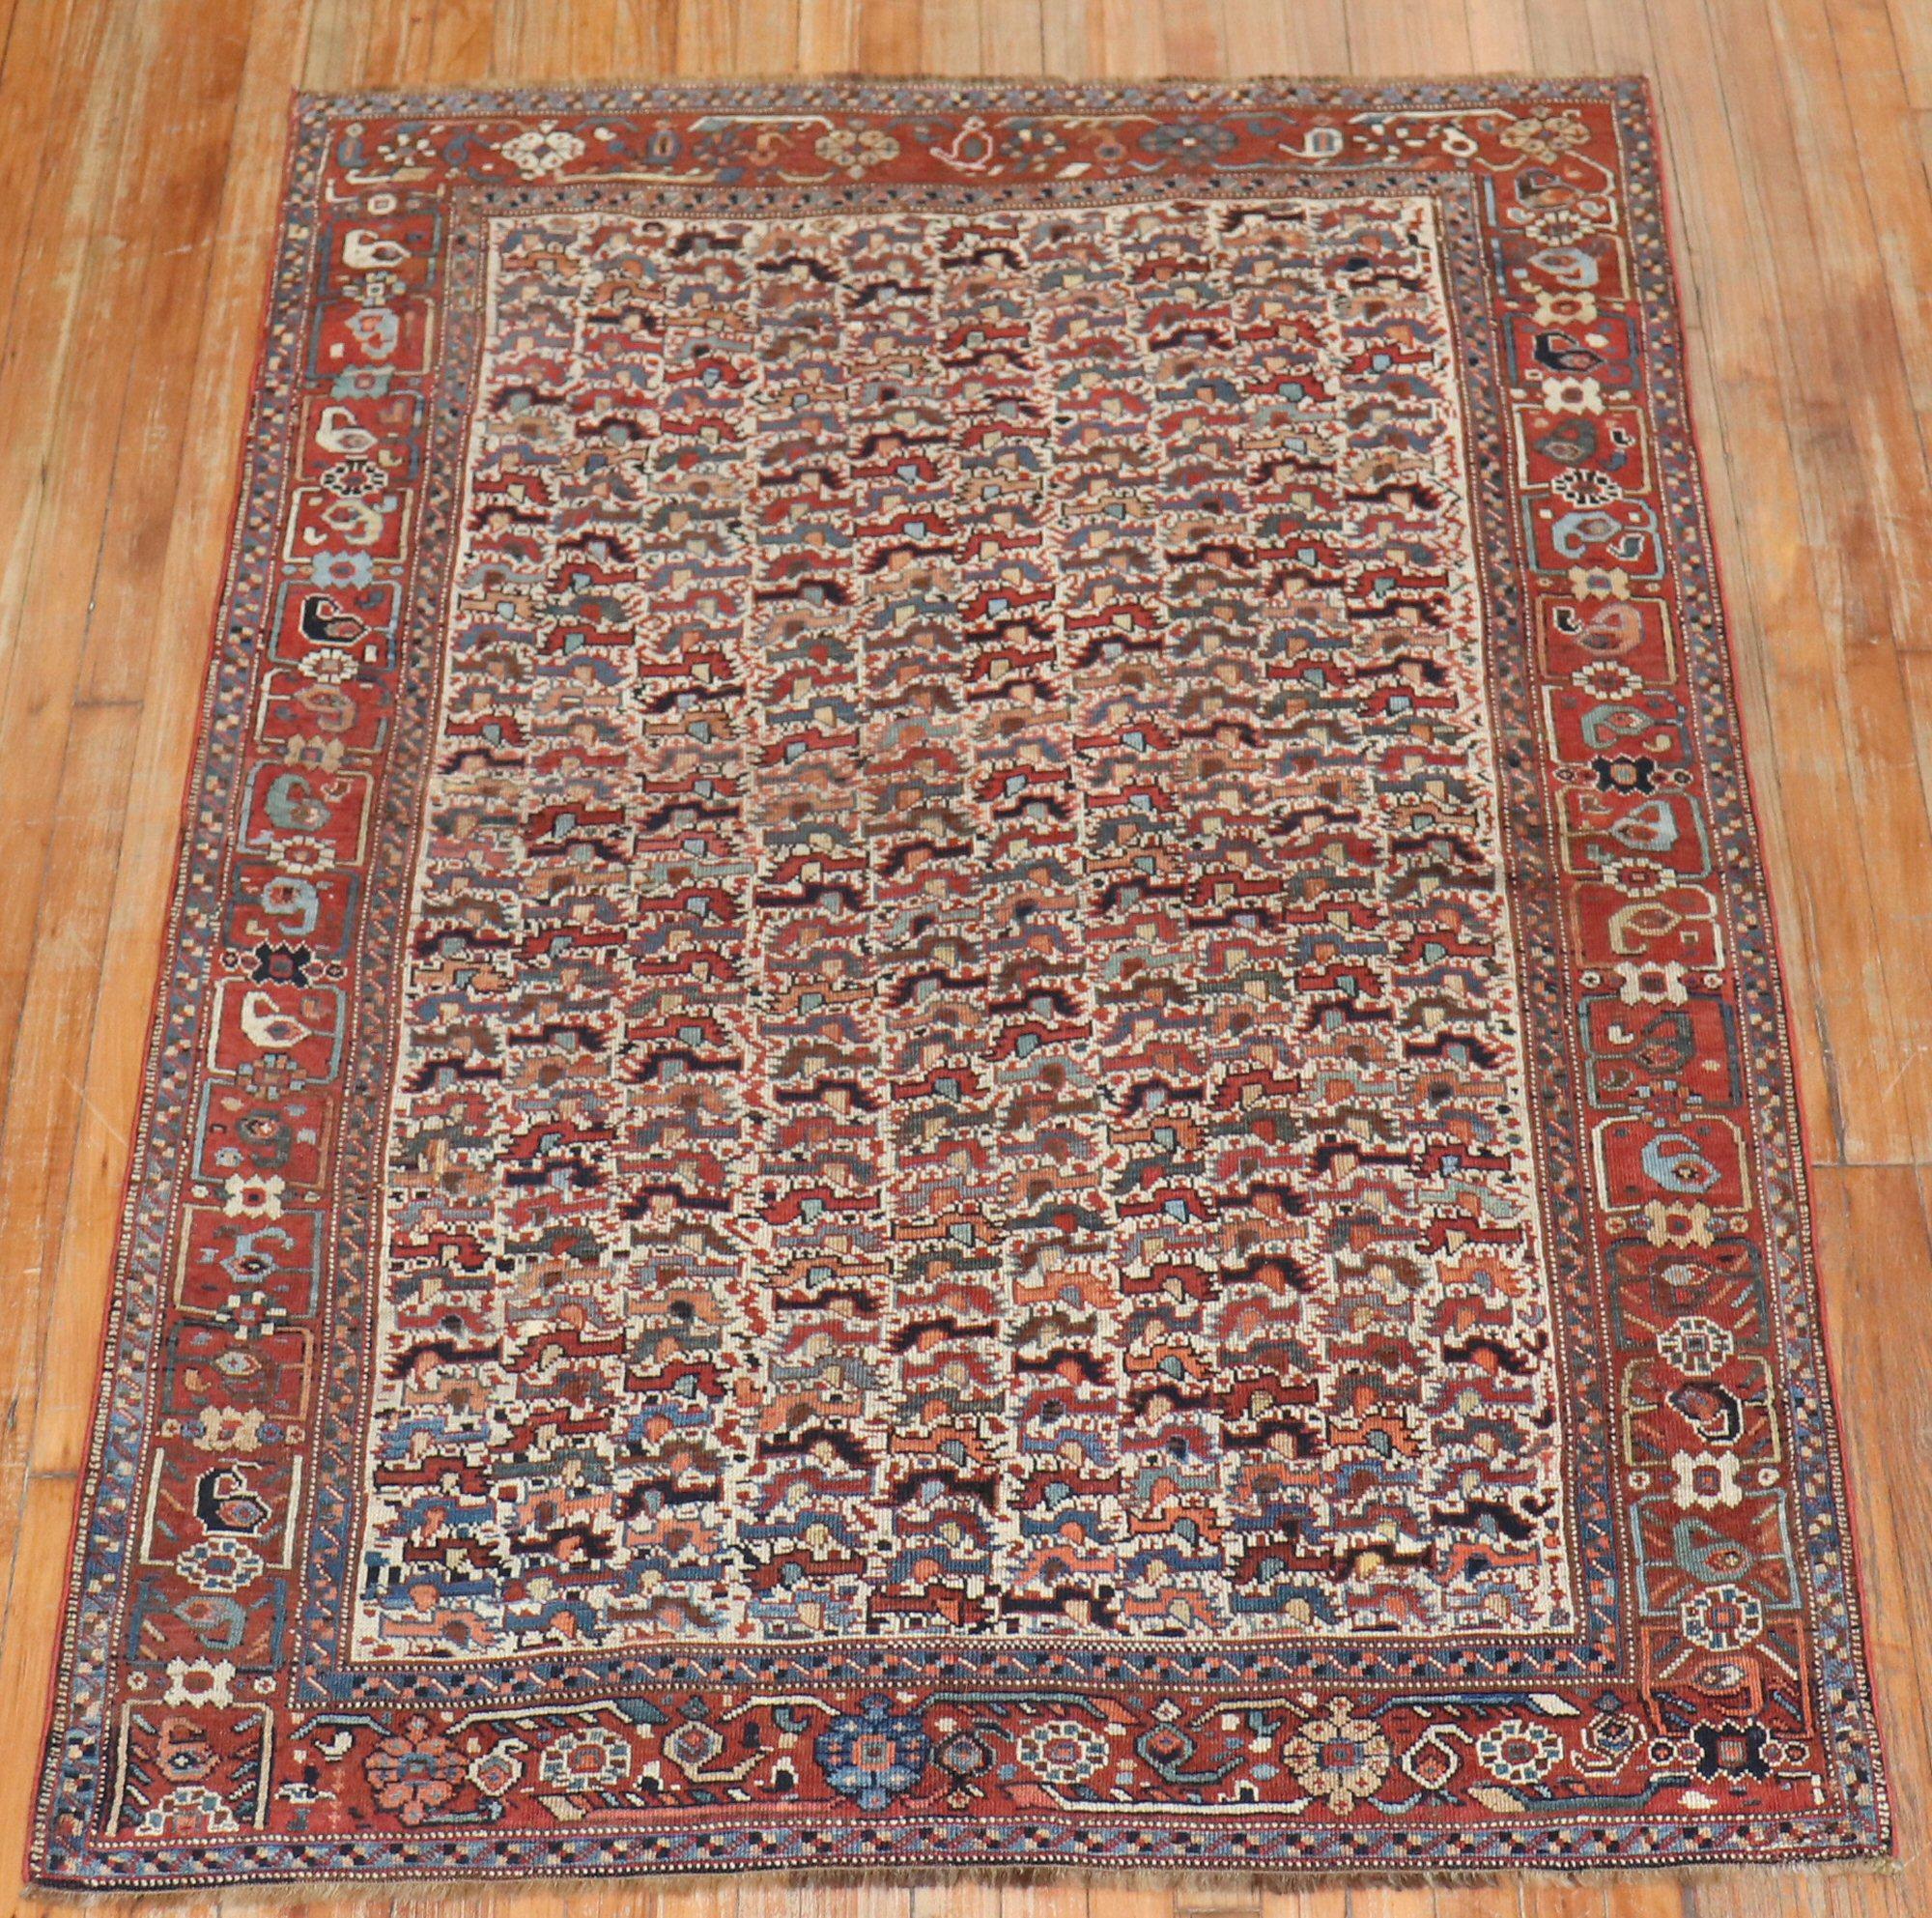 Tribal Chicken Motif Rustic Persian Afshar Accent Rug, Early 20th Century For Sale 4